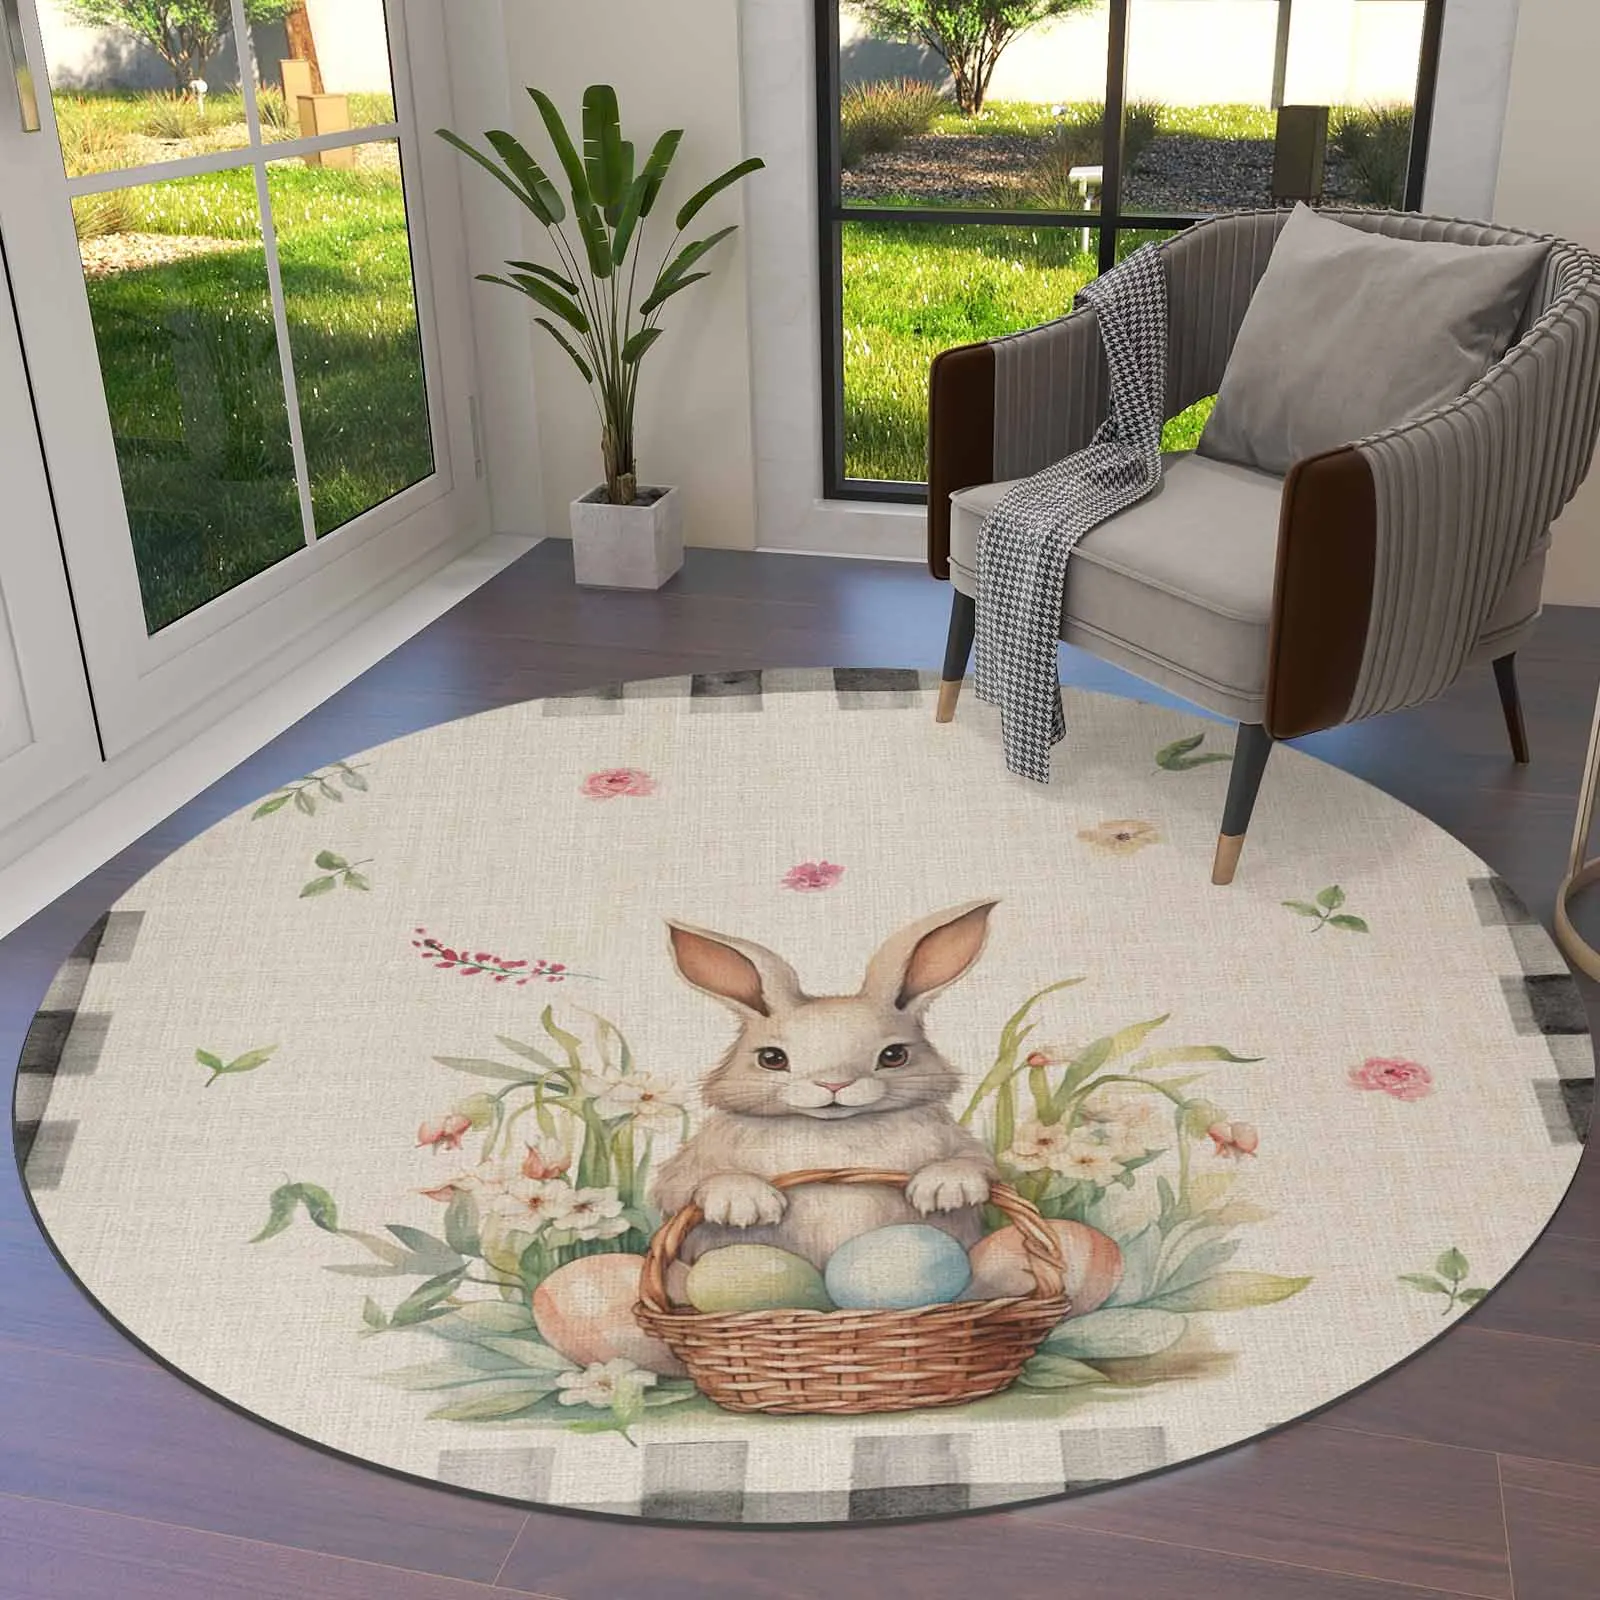 

Easter Rabbit Watercolor Plaid Pattern Round Area Rug Carpets For Living Room Large Mat Home Bedroom Kid Room Decoration